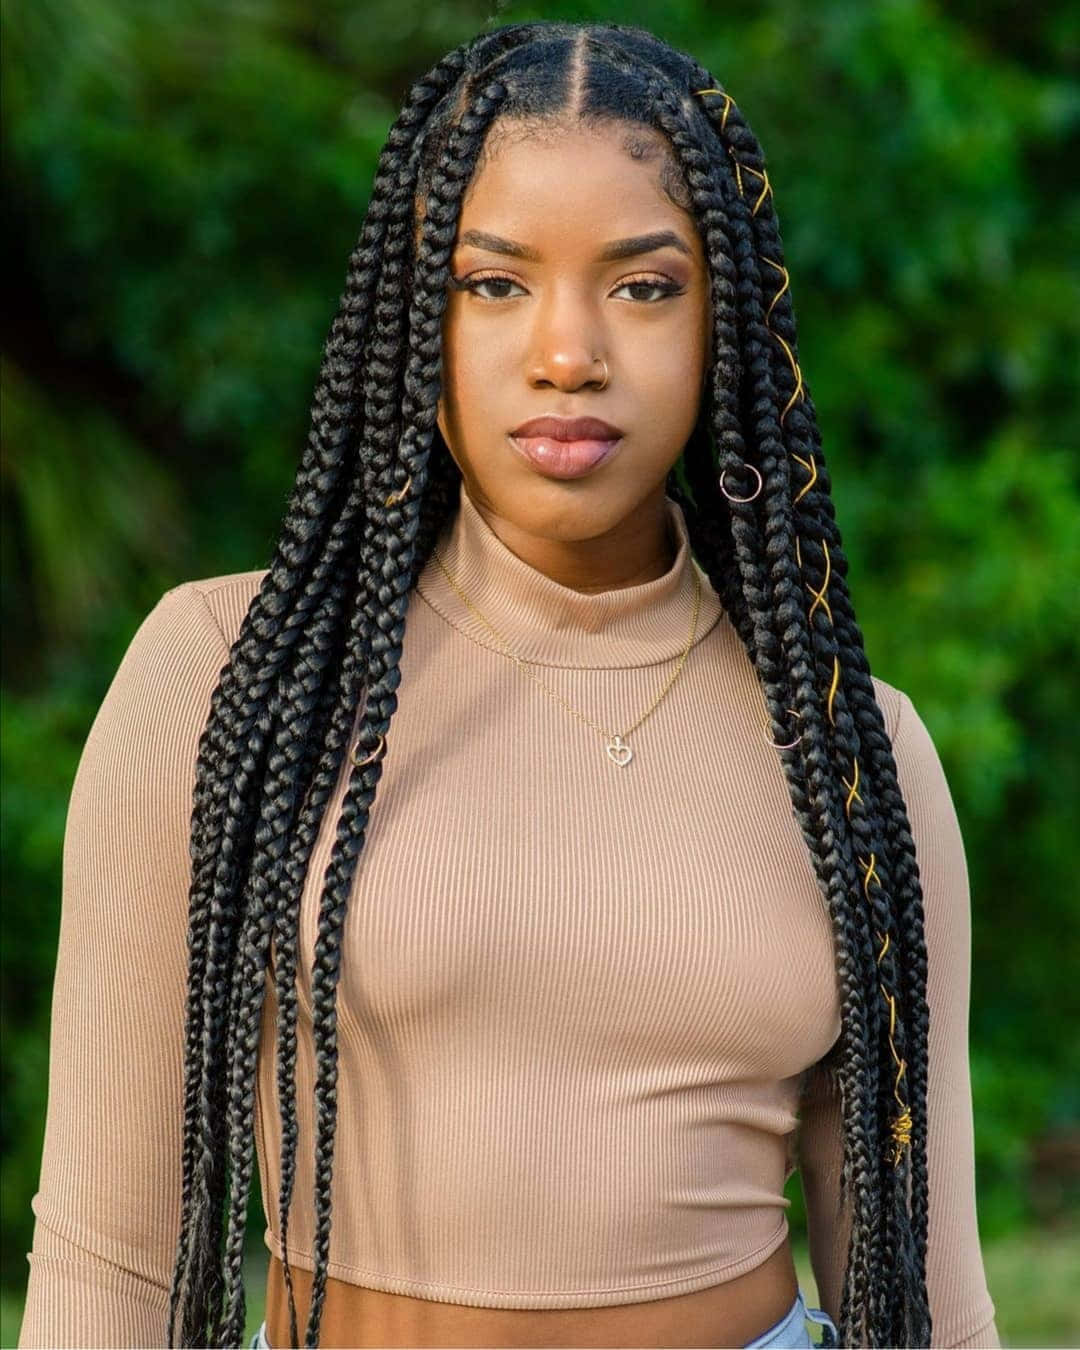 A Young Black Woman Wearing A Beige Top And Long Braids